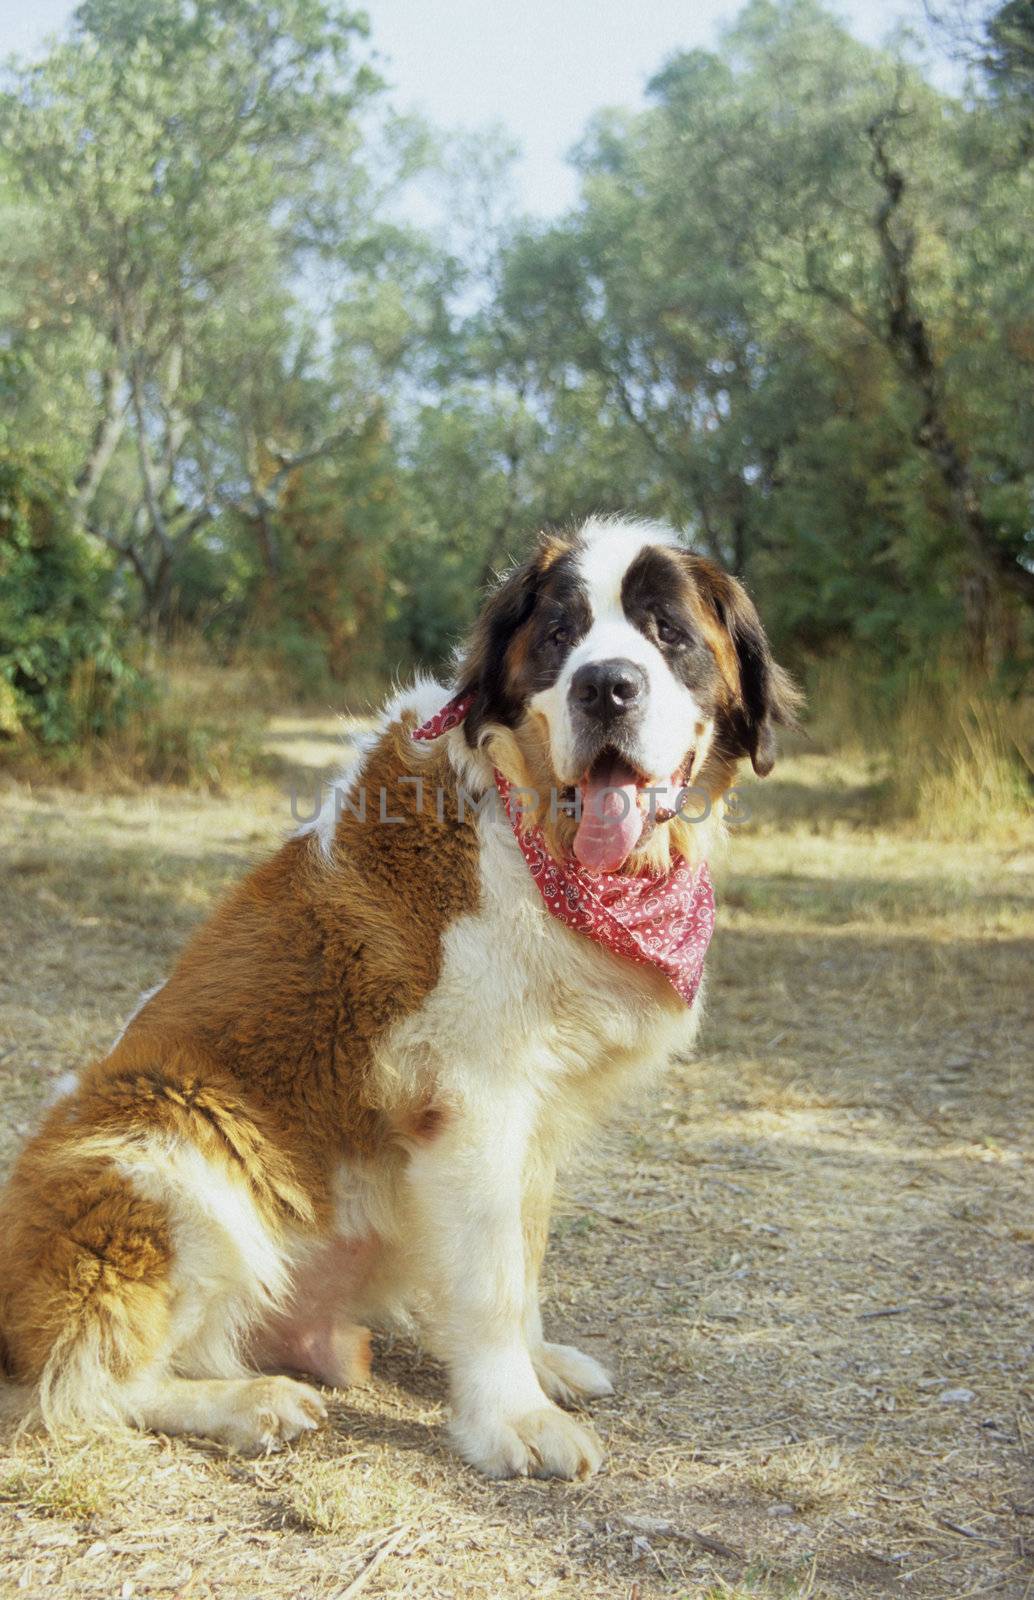 A happy but hot Saint Bernard dog enjoying a vacation in the South of France. Olive grove in the background.